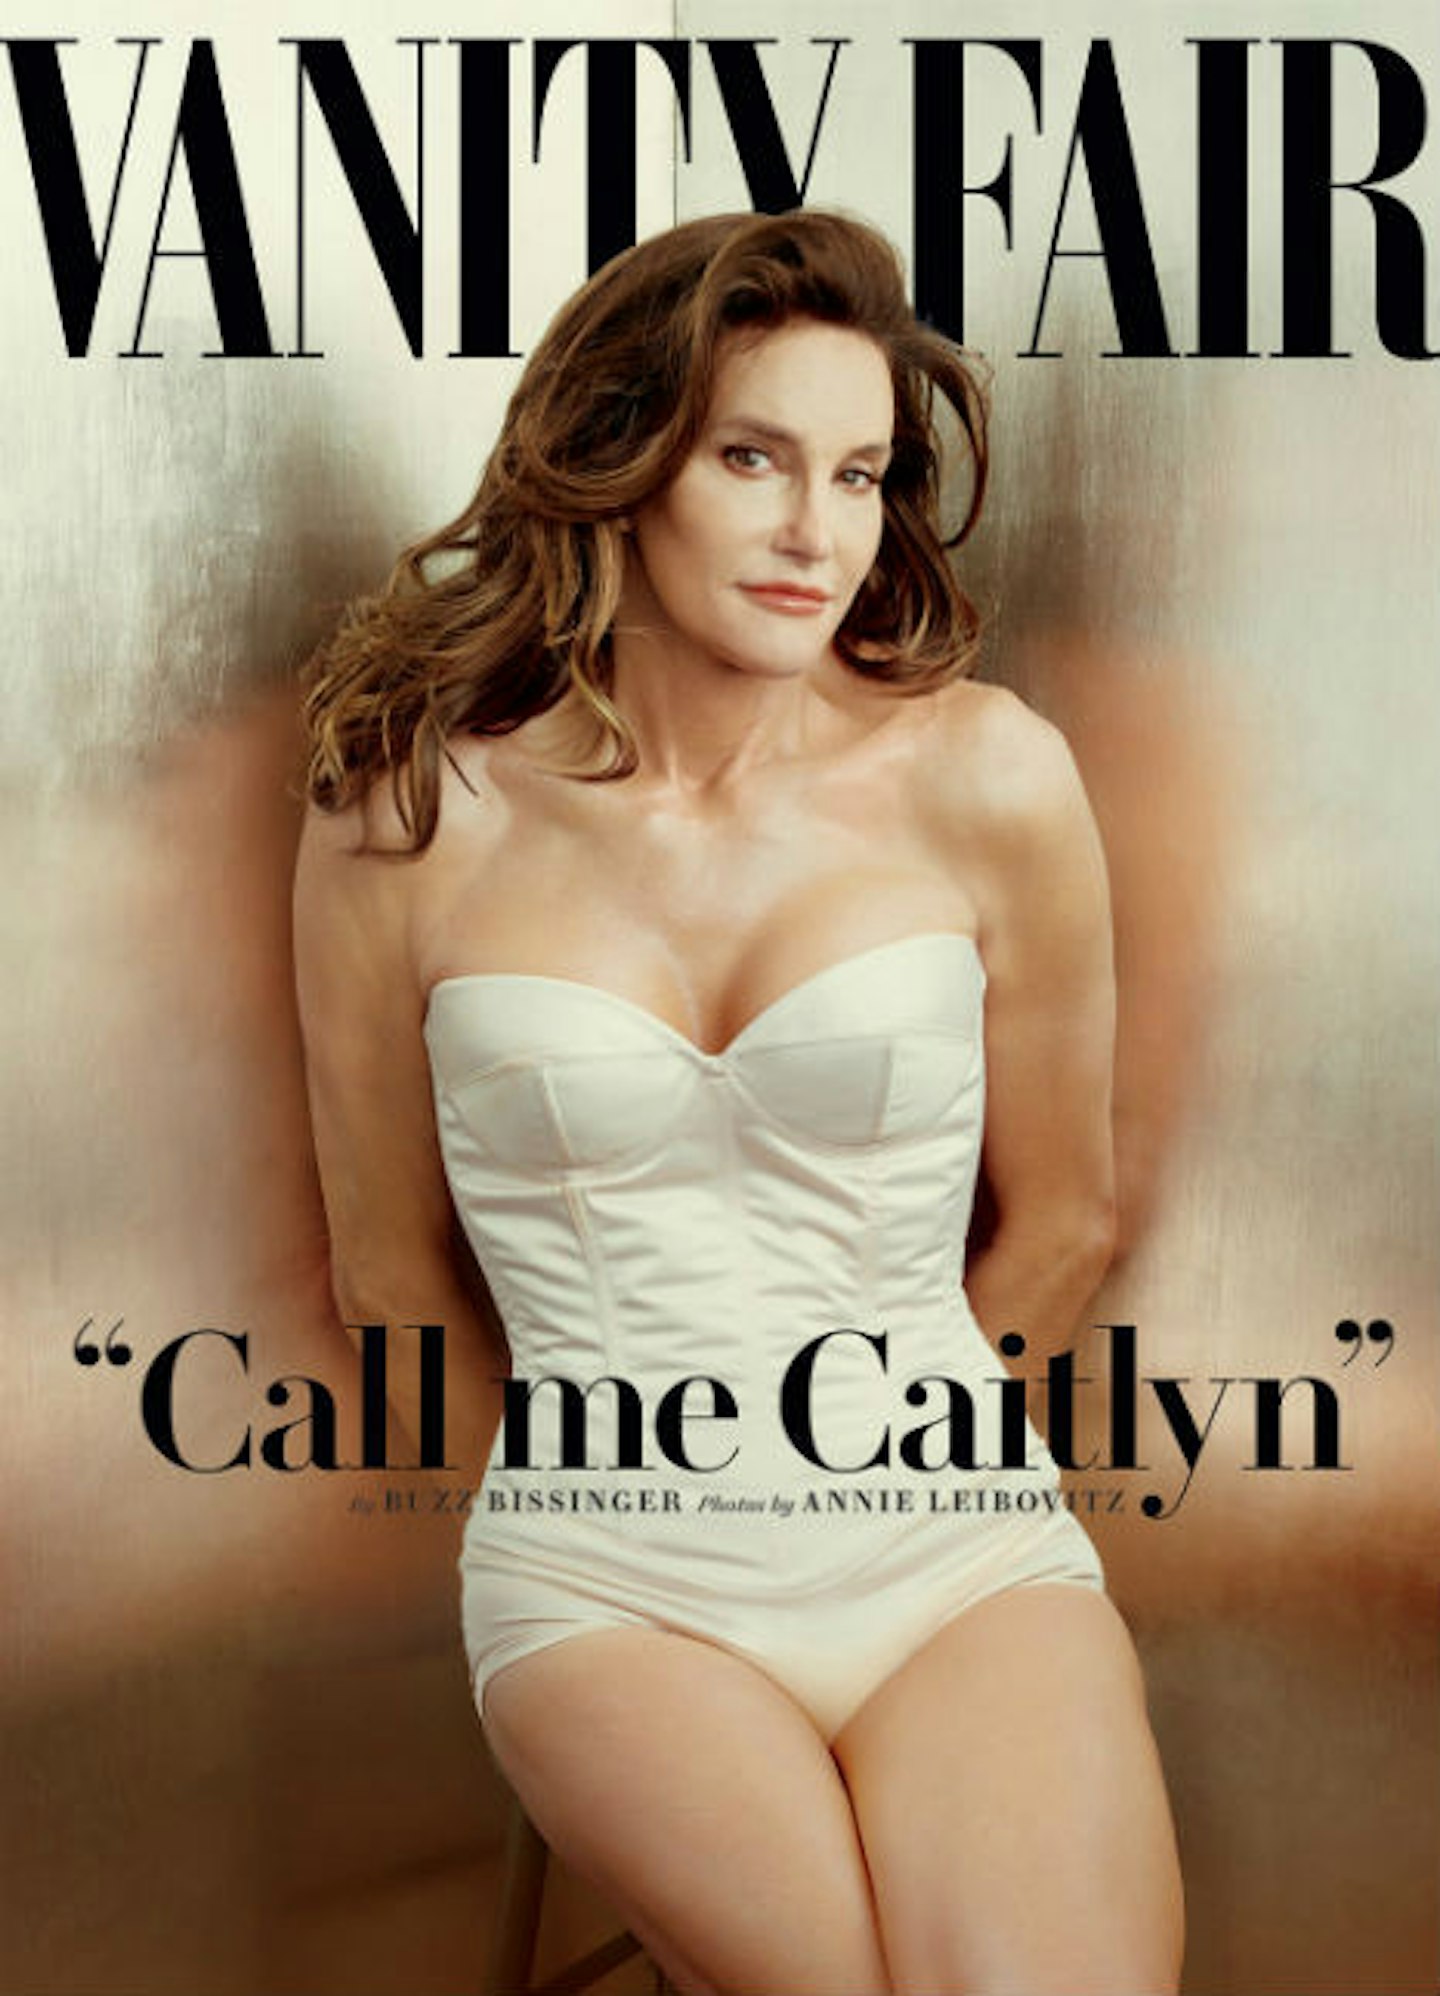 Caitlyn was unveiled to the world in Vanity Fair